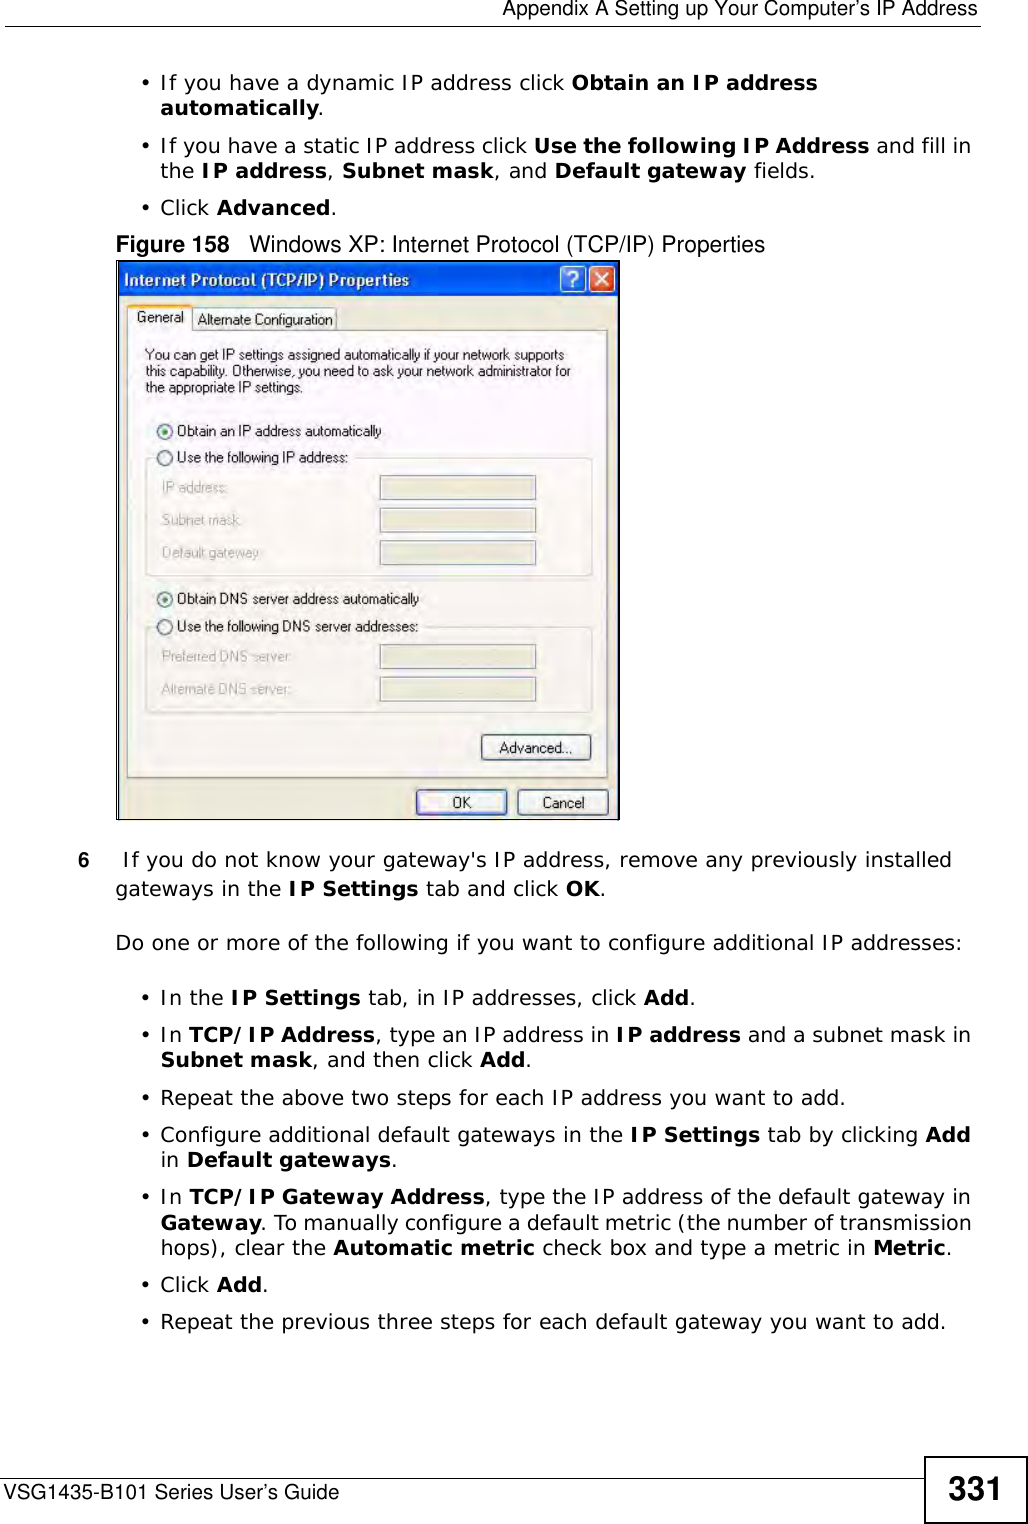  Appendix A Setting up Your Computer’s IP AddressVSG1435-B101 Series User’s Guide 331• If you have a dynamic IP address click Obtain an IP address automatically.• If you have a static IP address click Use the following IP Address and fill in the IP address, Subnet mask, and Default gateway fields. •Click Advanced.Figure 158   Windows XP: Internet Protocol (TCP/IP) Properties6 If you do not know your gateway&apos;s IP address, remove any previously installed gateways in the IP Settings tab and click OK.Do one or more of the following if you want to configure additional IP addresses:•In the IP Settings tab, in IP addresses, click Add.•In TCP/IP Address, type an IP address in IP address and a subnet mask in Subnet mask, and then click Add.• Repeat the above two steps for each IP address you want to add.• Configure additional default gateways in the IP Settings tab by clicking Add in Default gateways.•In TCP/IP Gateway Address, type the IP address of the default gateway in Gateway. To manually configure a default metric (the number of transmission hops), clear the Automatic metric check box and type a metric in Metric.•Click Add. • Repeat the previous three steps for each default gateway you want to add.